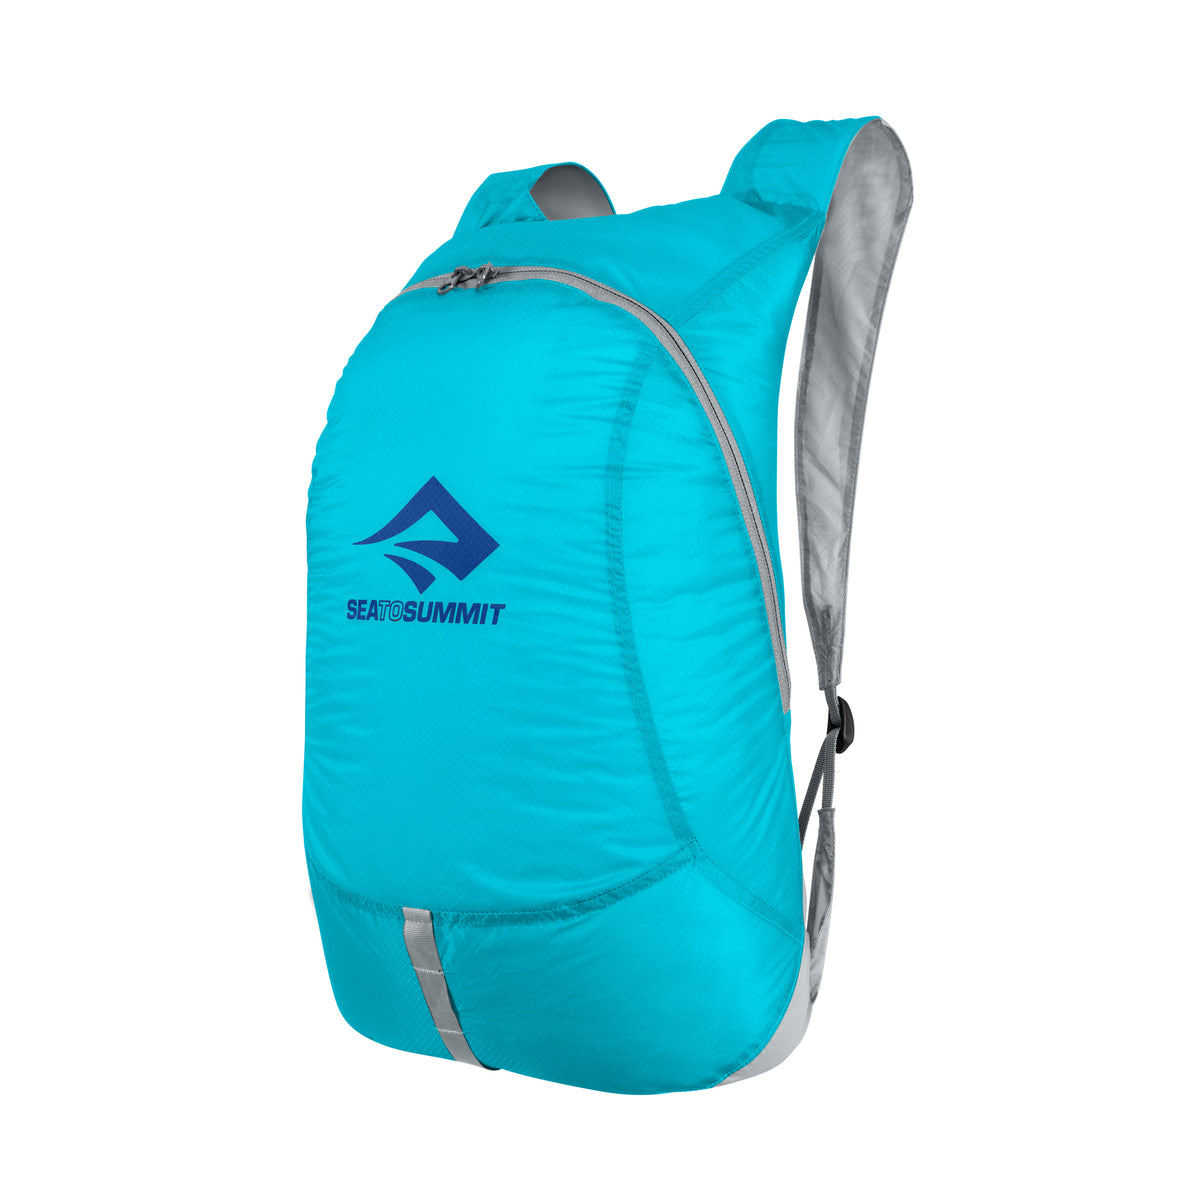 Sea to Summit - Ultra Sil Pack Cover - Medium - Pacific Blue